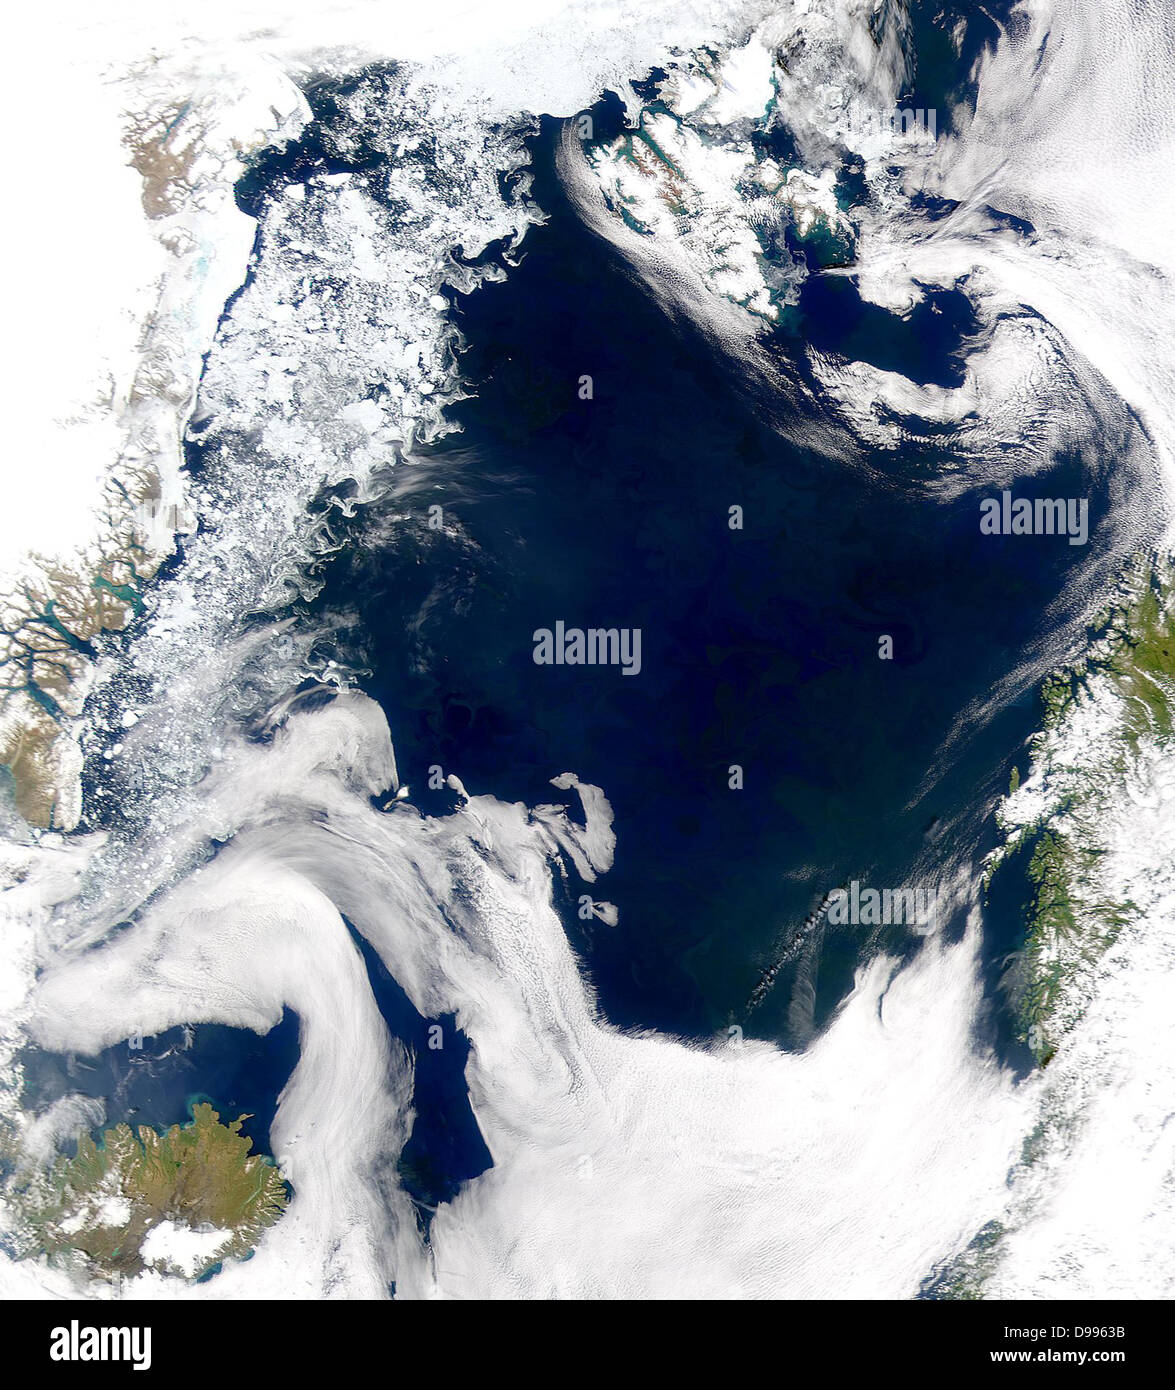 Credit Provided by the SeaWiFS Project, NASA/Goddard Space Flight Centre, and ORBIMAGE    The cold, productive waters of the Greenland Sea and Norwegian Sea are revealed in this SeaWiFS image. Stock Photo